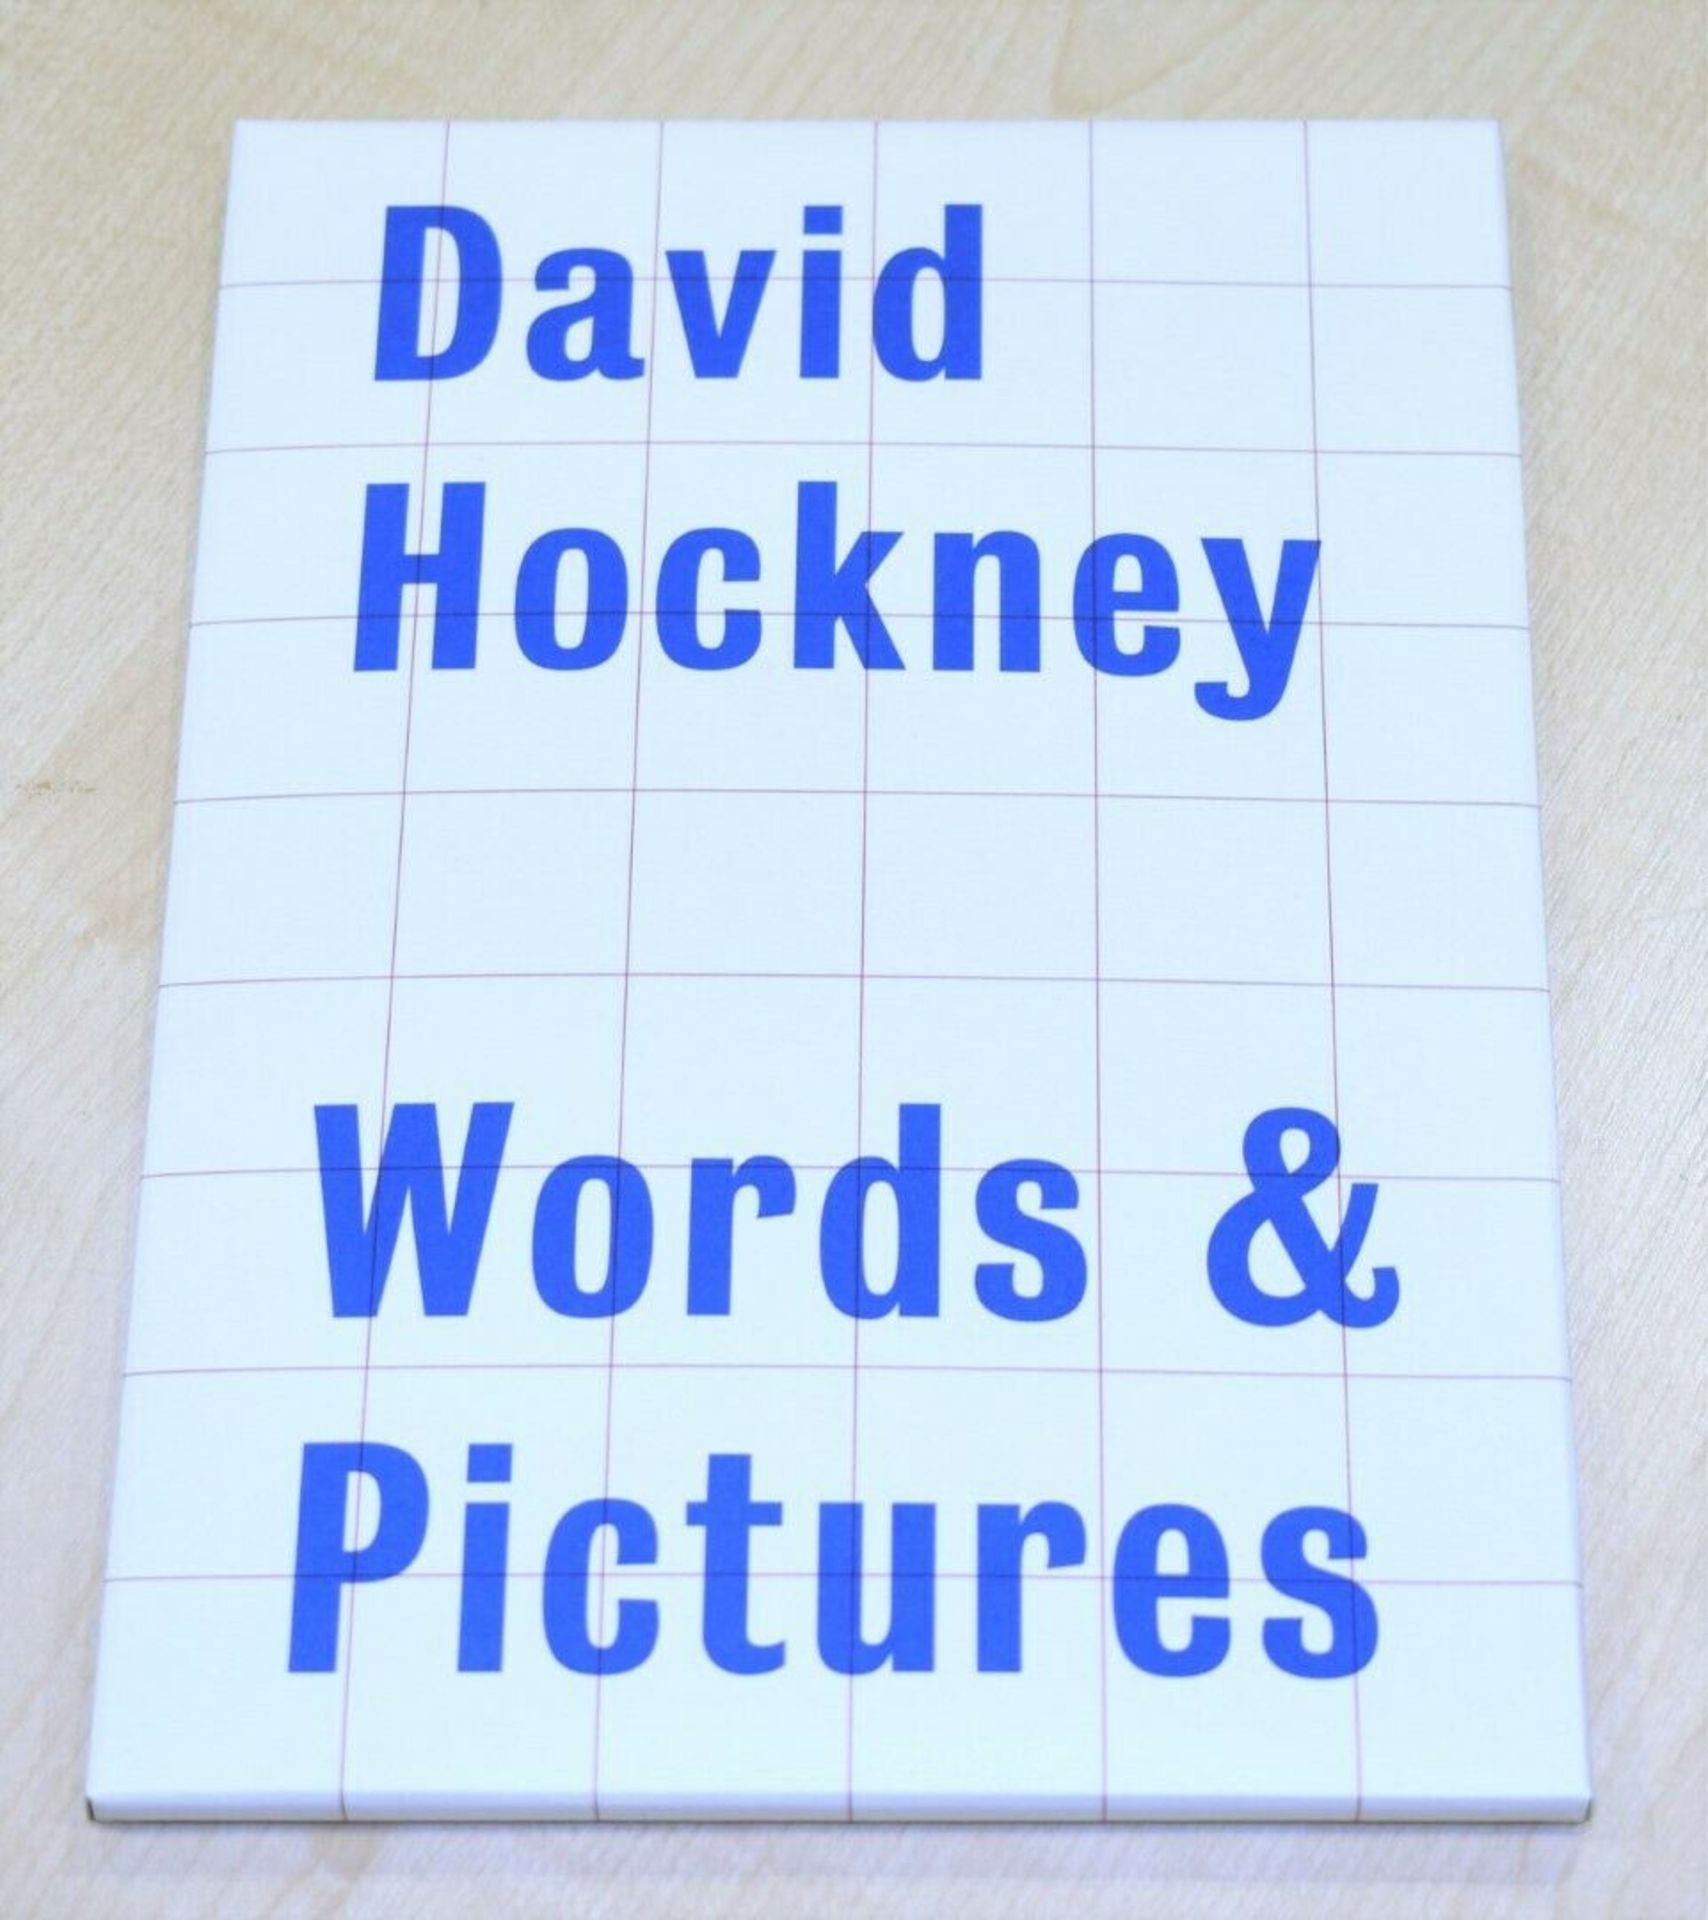 1 x David Hockney Words & Pictures - British Council Touring Program With 11 Prints - Brand New - Image 9 of 9